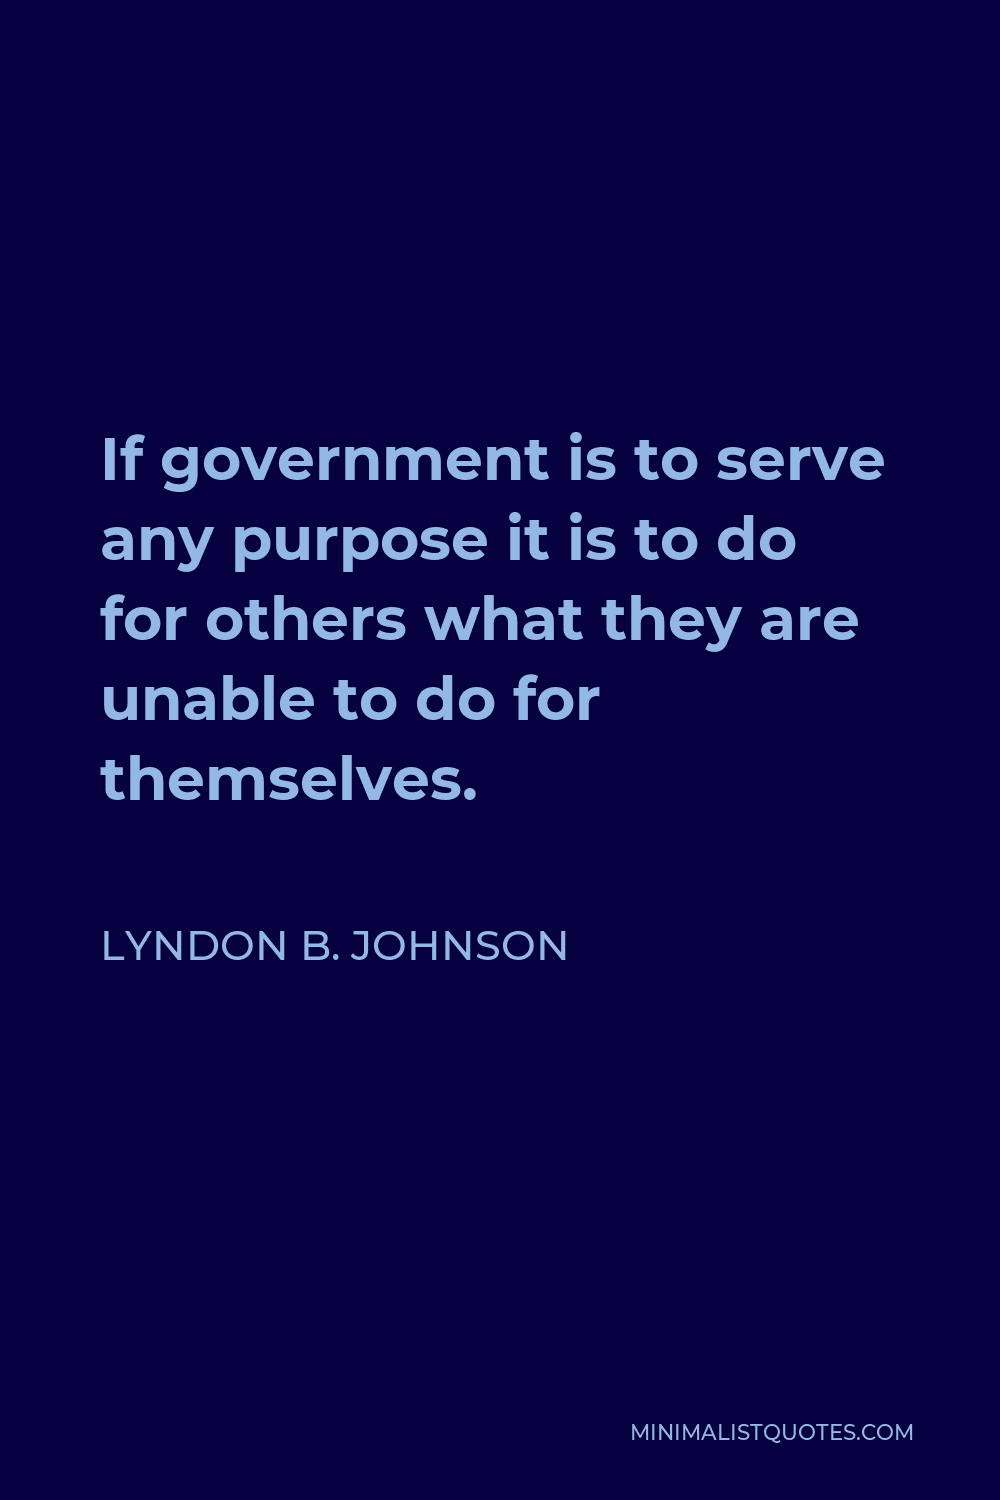 Lyndon B. Johnson Quote - If government is to serve any purpose it is to do for others what they are unable to do for themselves.